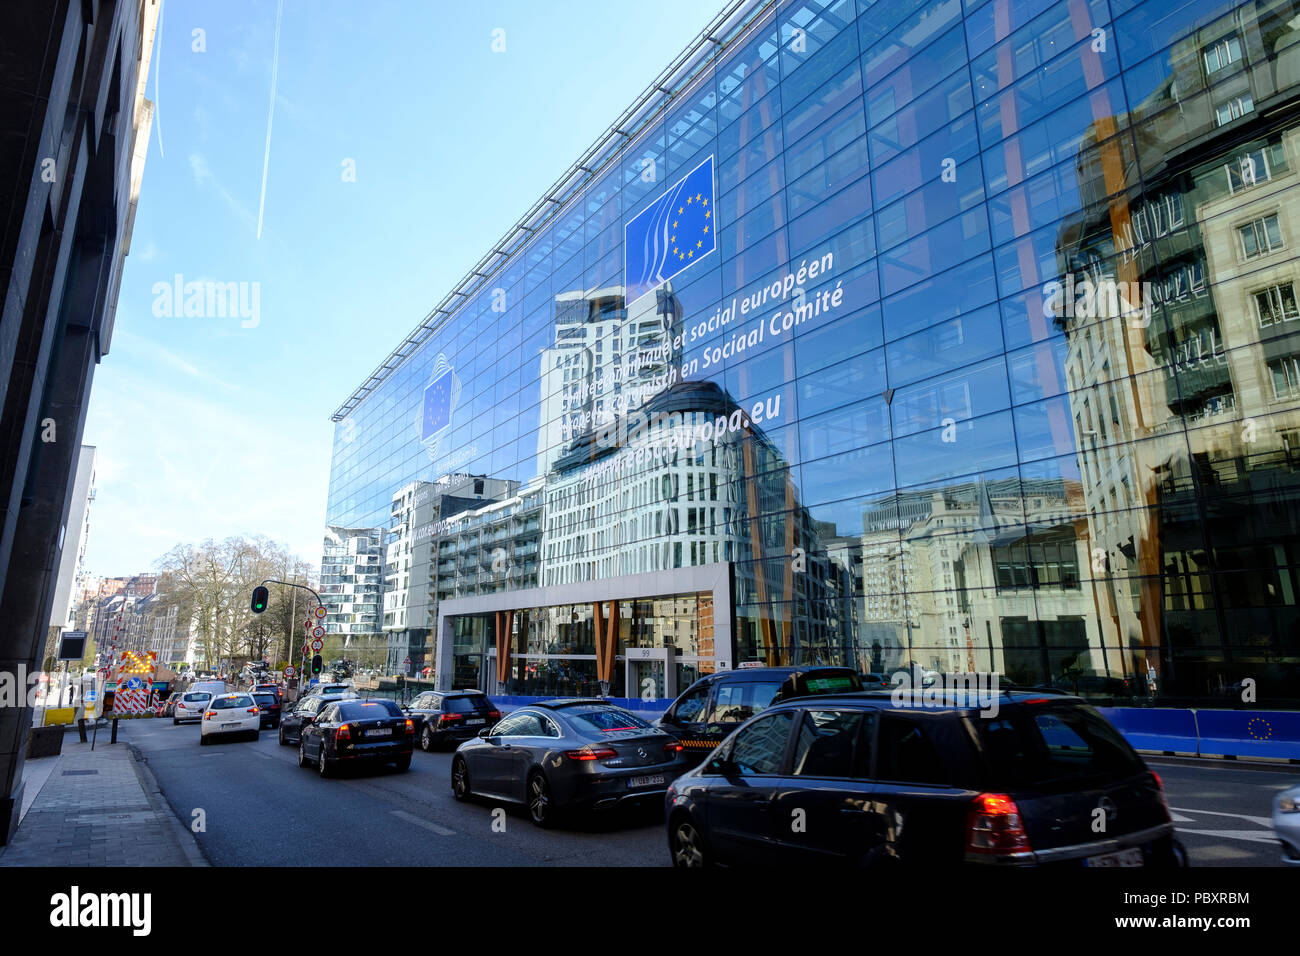 Belgium, Brussels: glass facade of the Jacques Delors building, European Economic and Social Committee Headquarters (EESC), located at 99 Rue Belliard Stock Photo